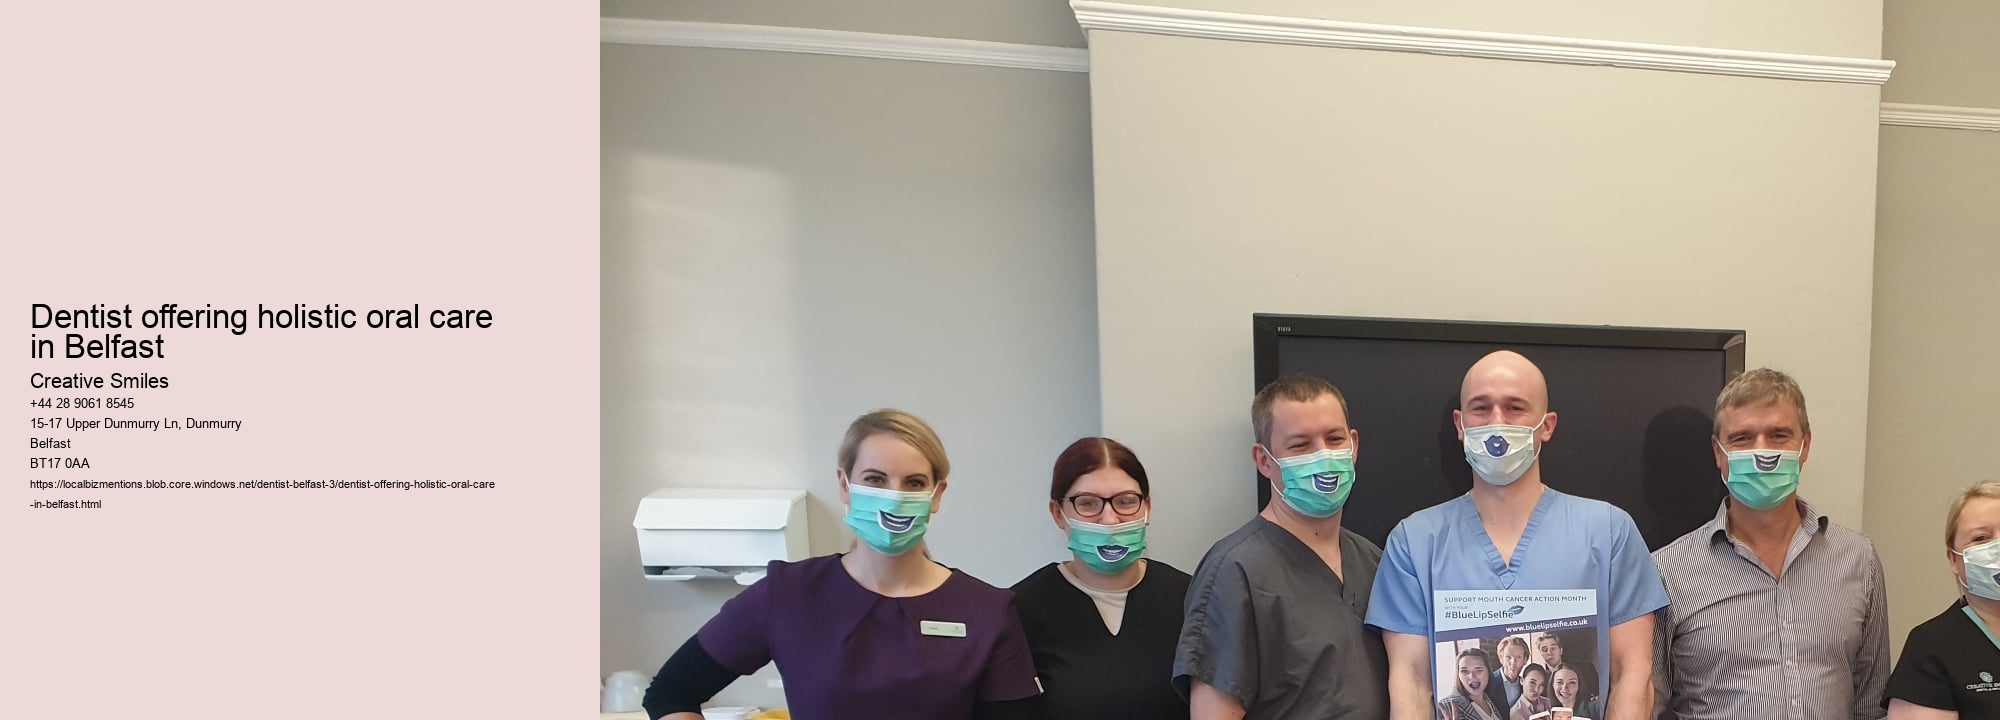 Dentist offering holistic oral care in Belfast